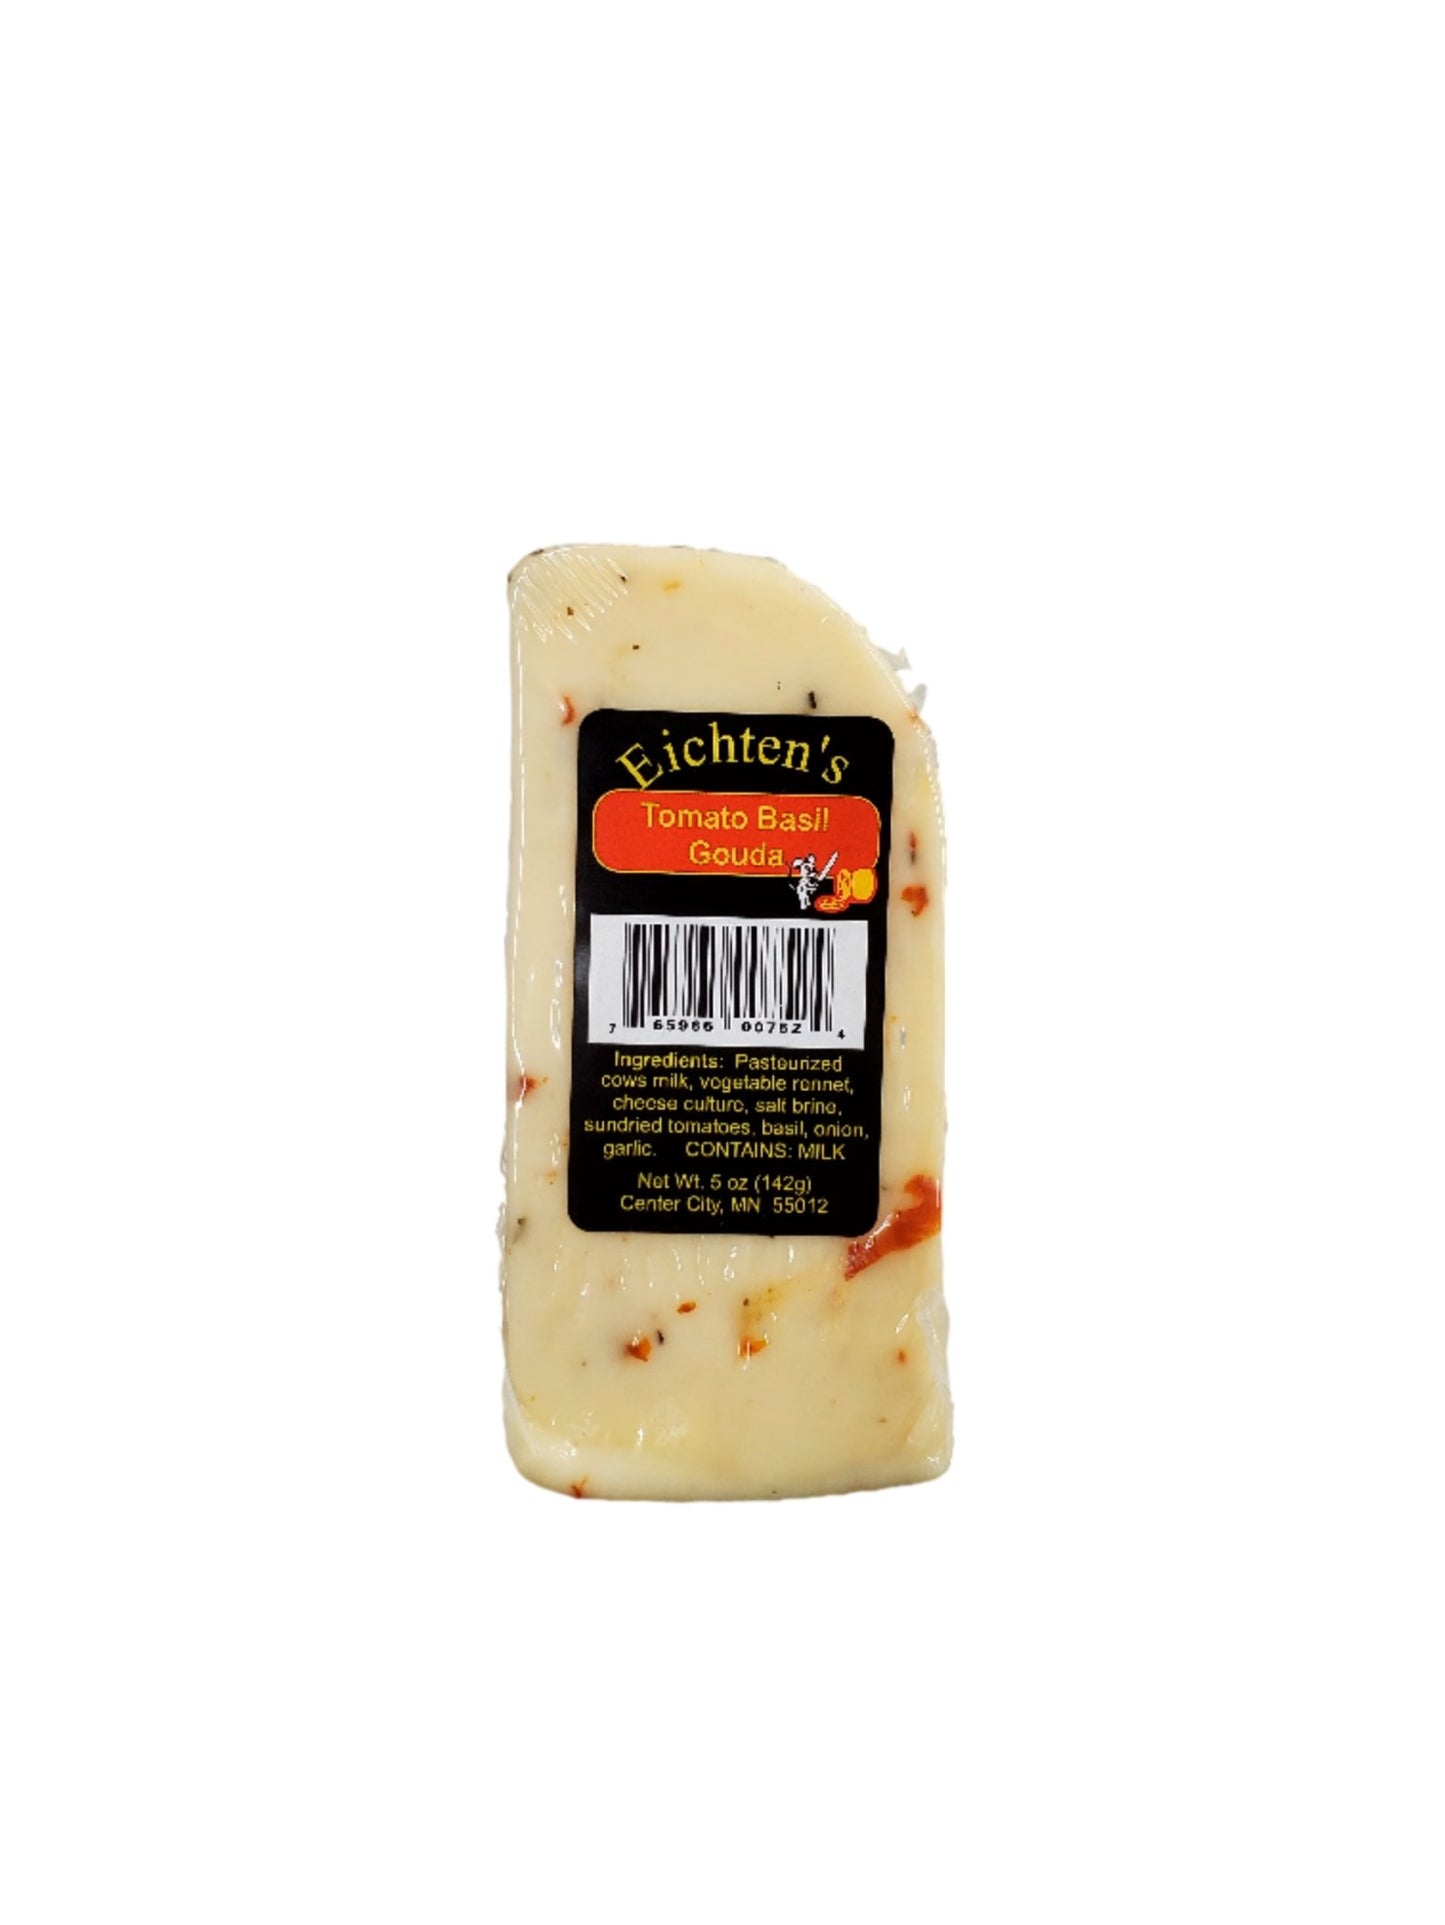 Eichtens Tomato Basil Gouda Cheese - 5 oz Wedge - Eichtens Cheeses, Gifts & FoodsAll Products